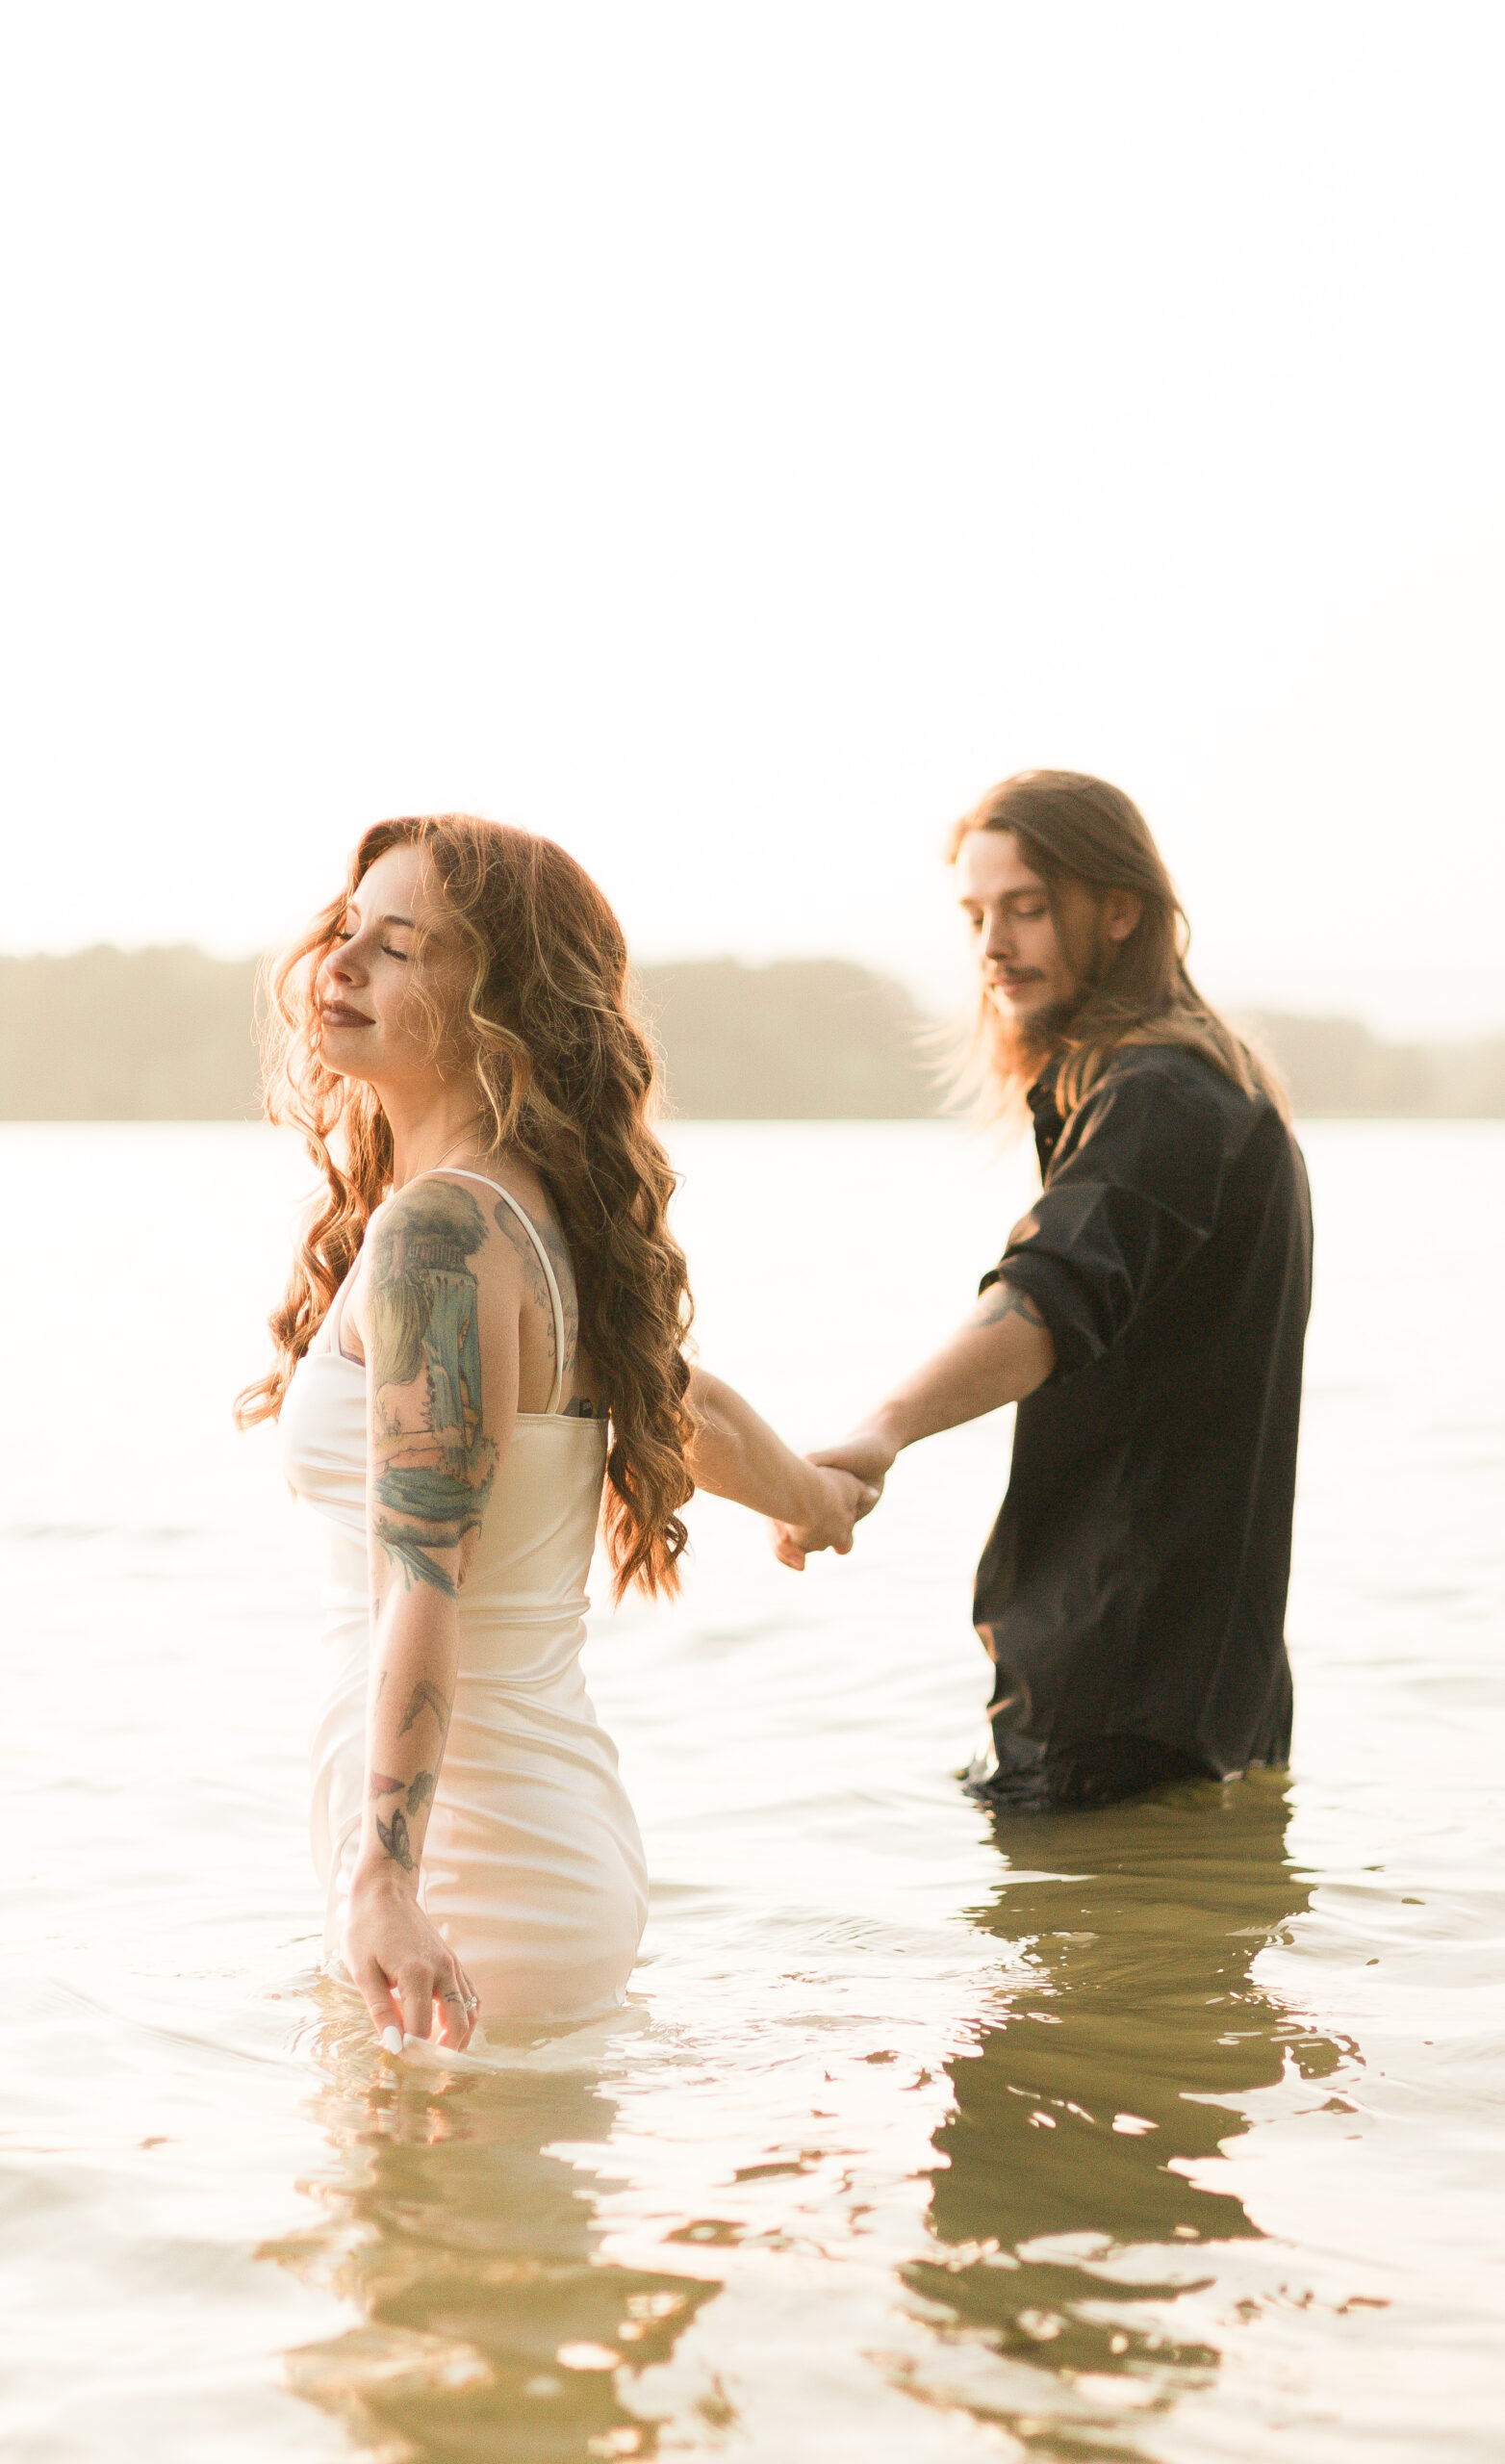 Dreamy elopement in a lake